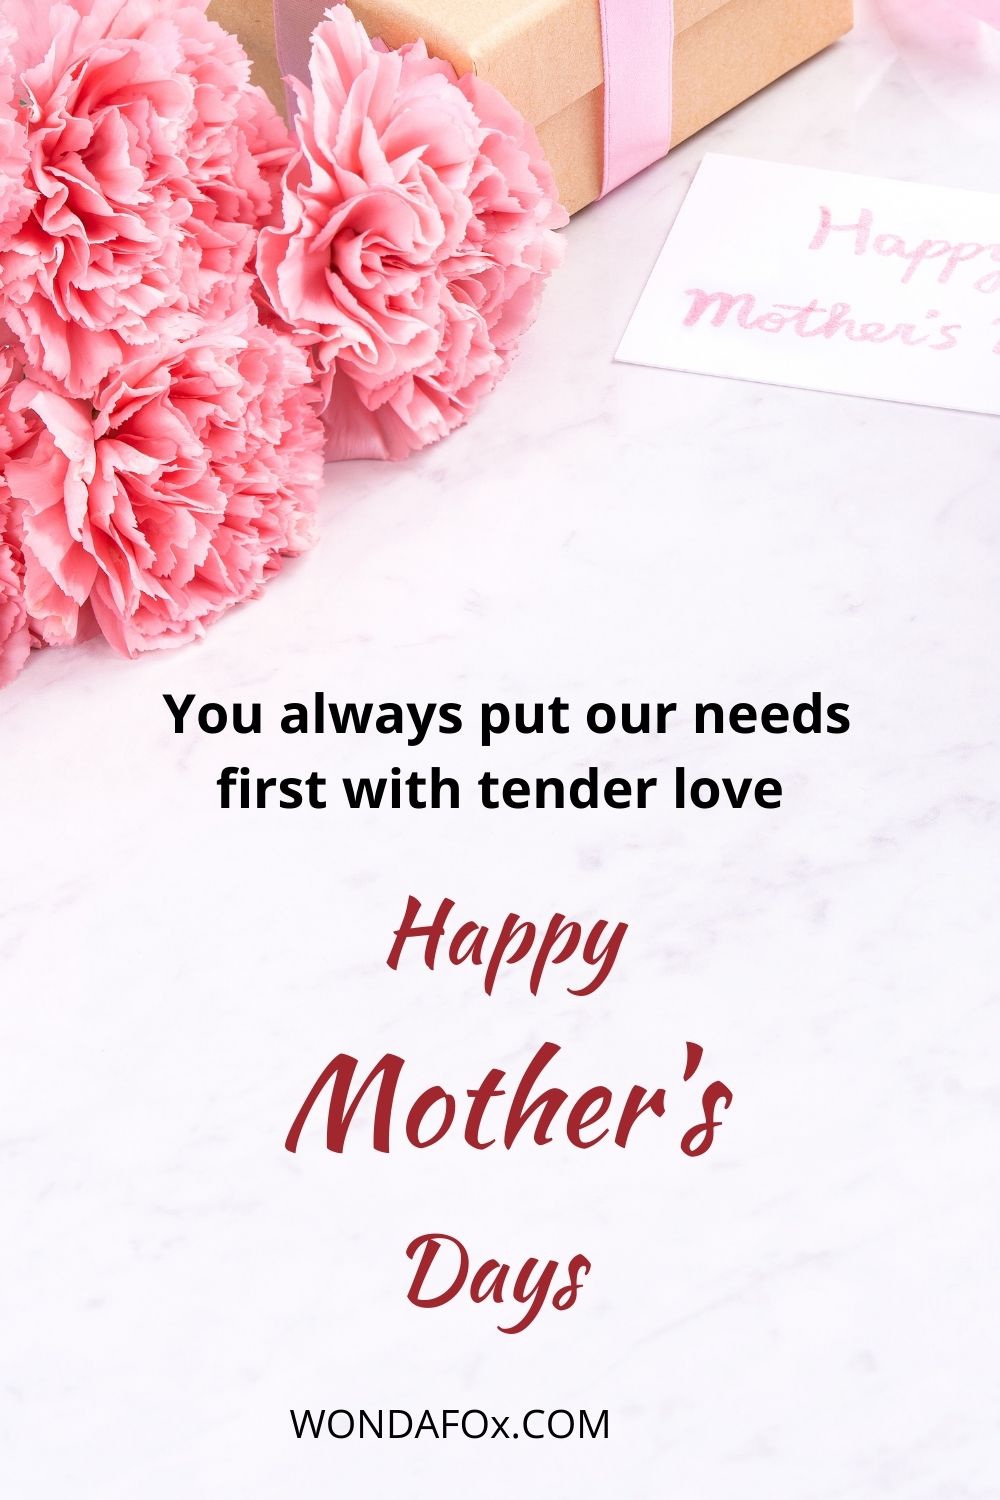  You always put our needs first with tender love. Happy Mother’s Day! Mothers day wishes